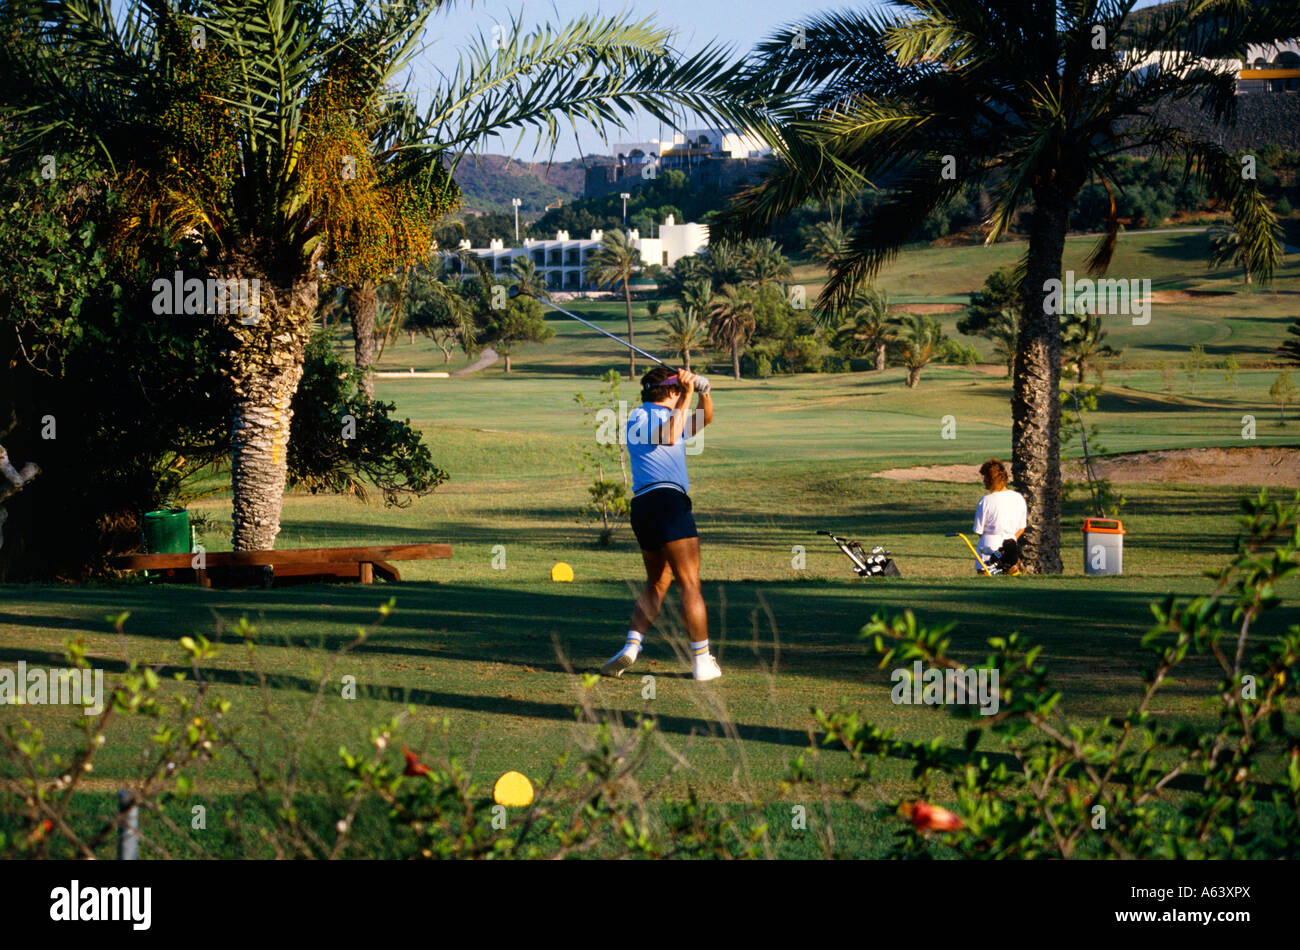 golf course editorial use only Stock Photo